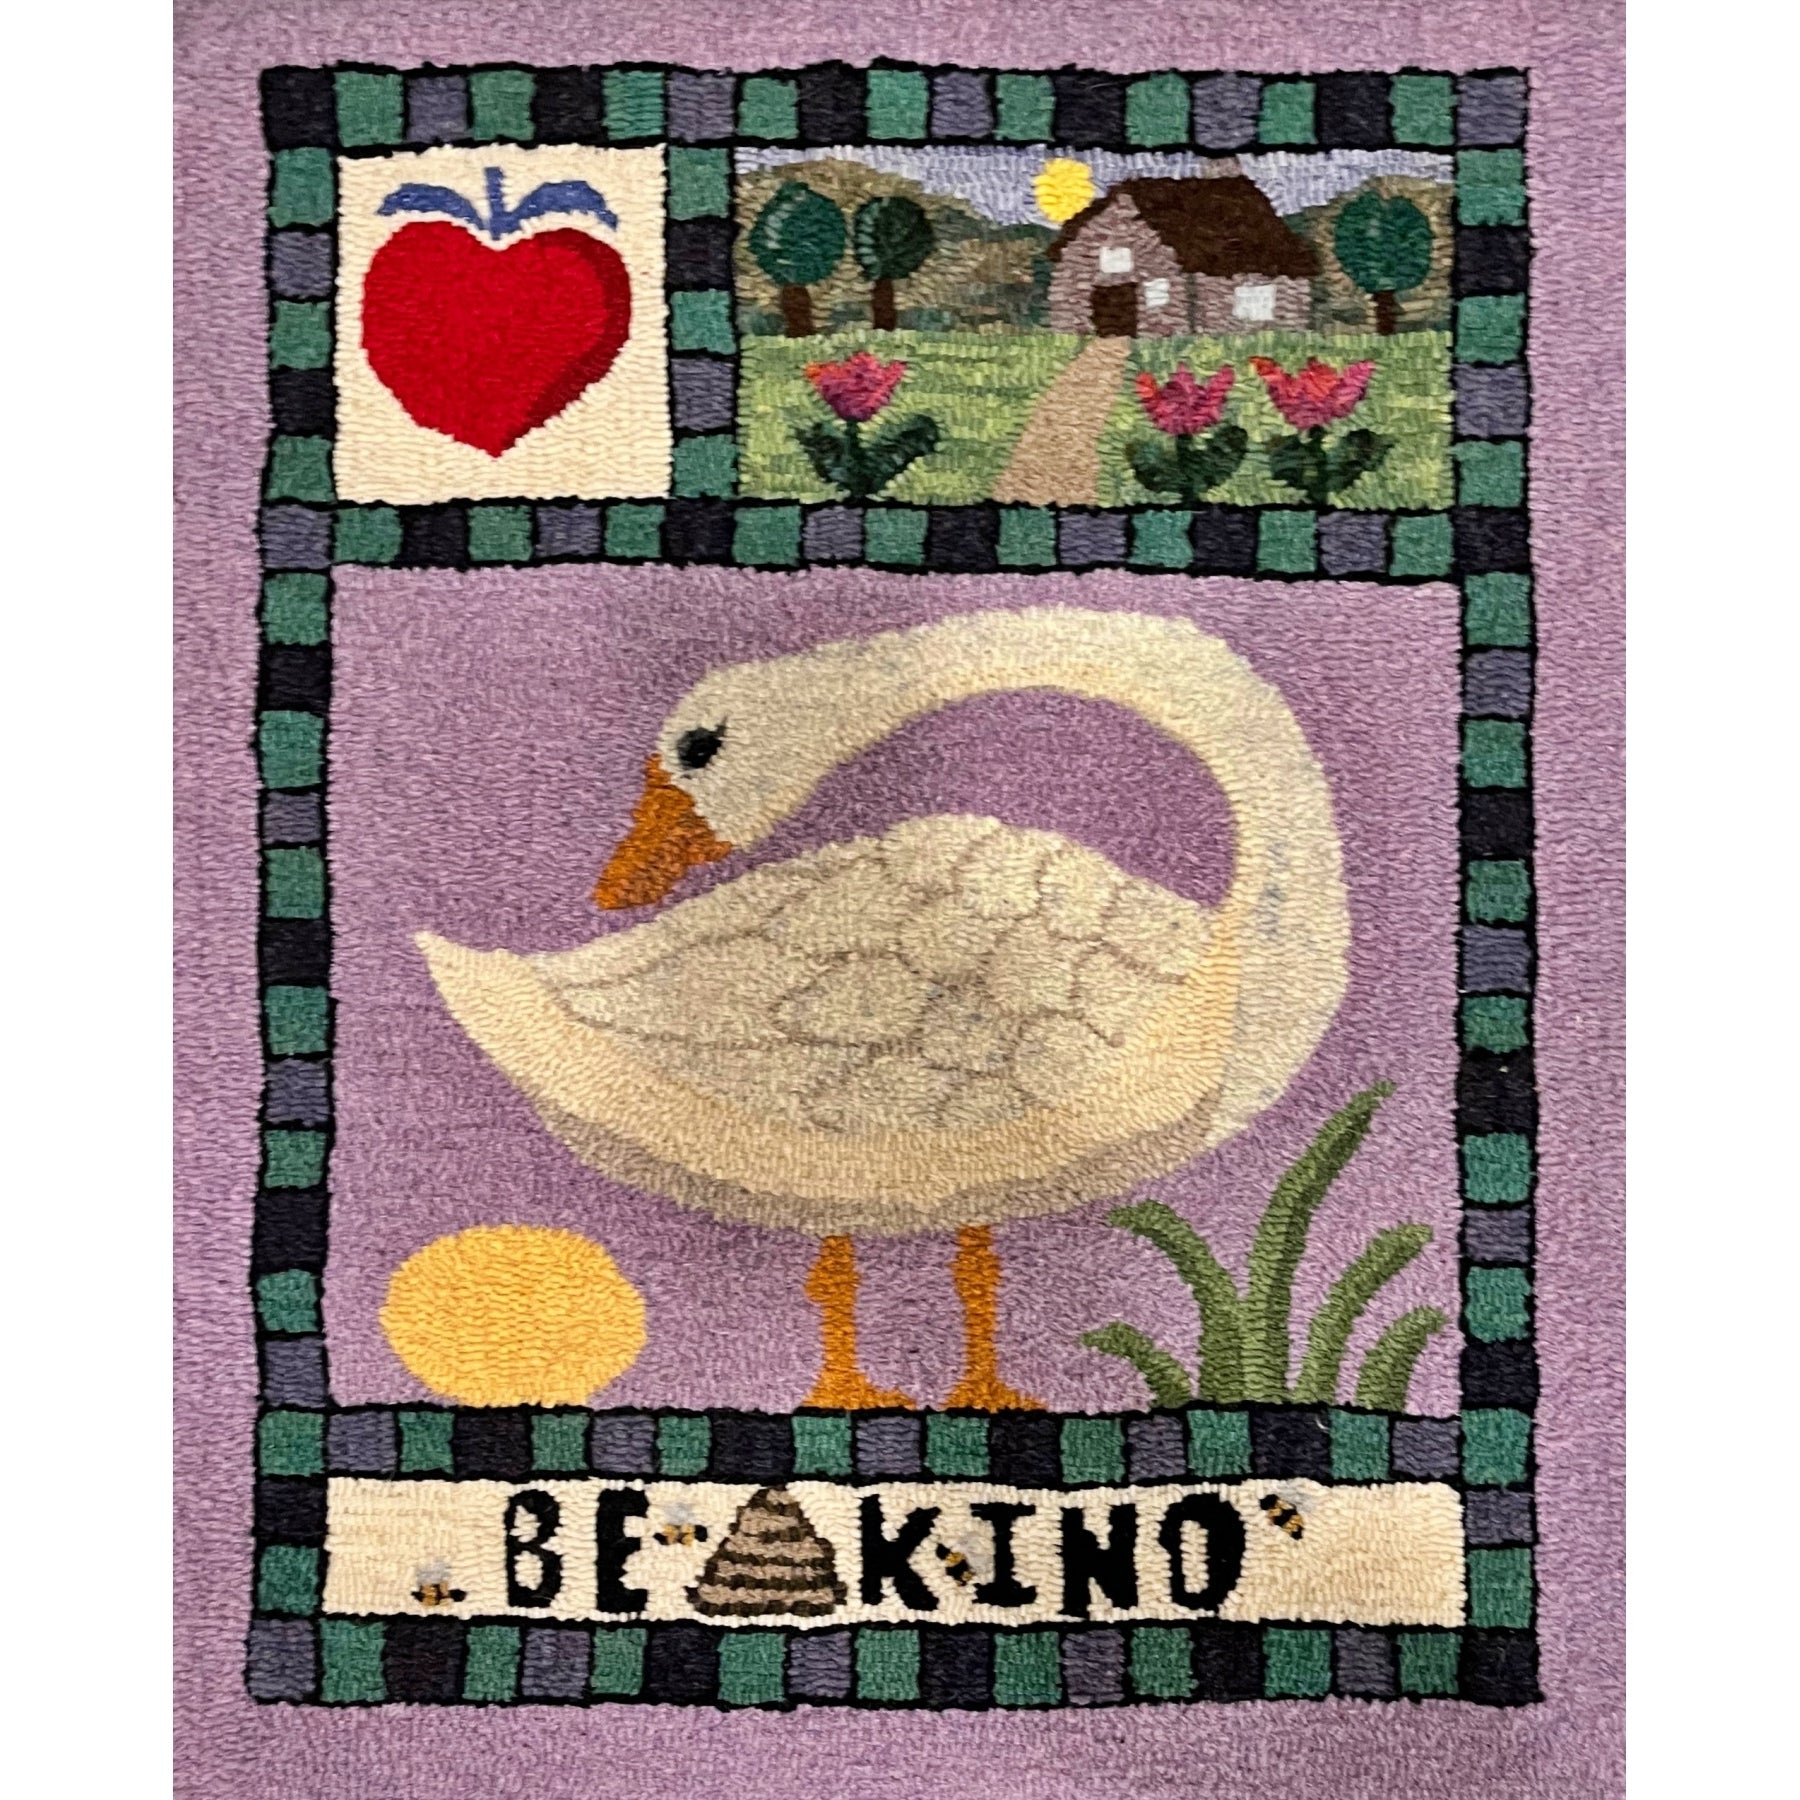 Country Goose Sampler, rug hooked by Donna Null